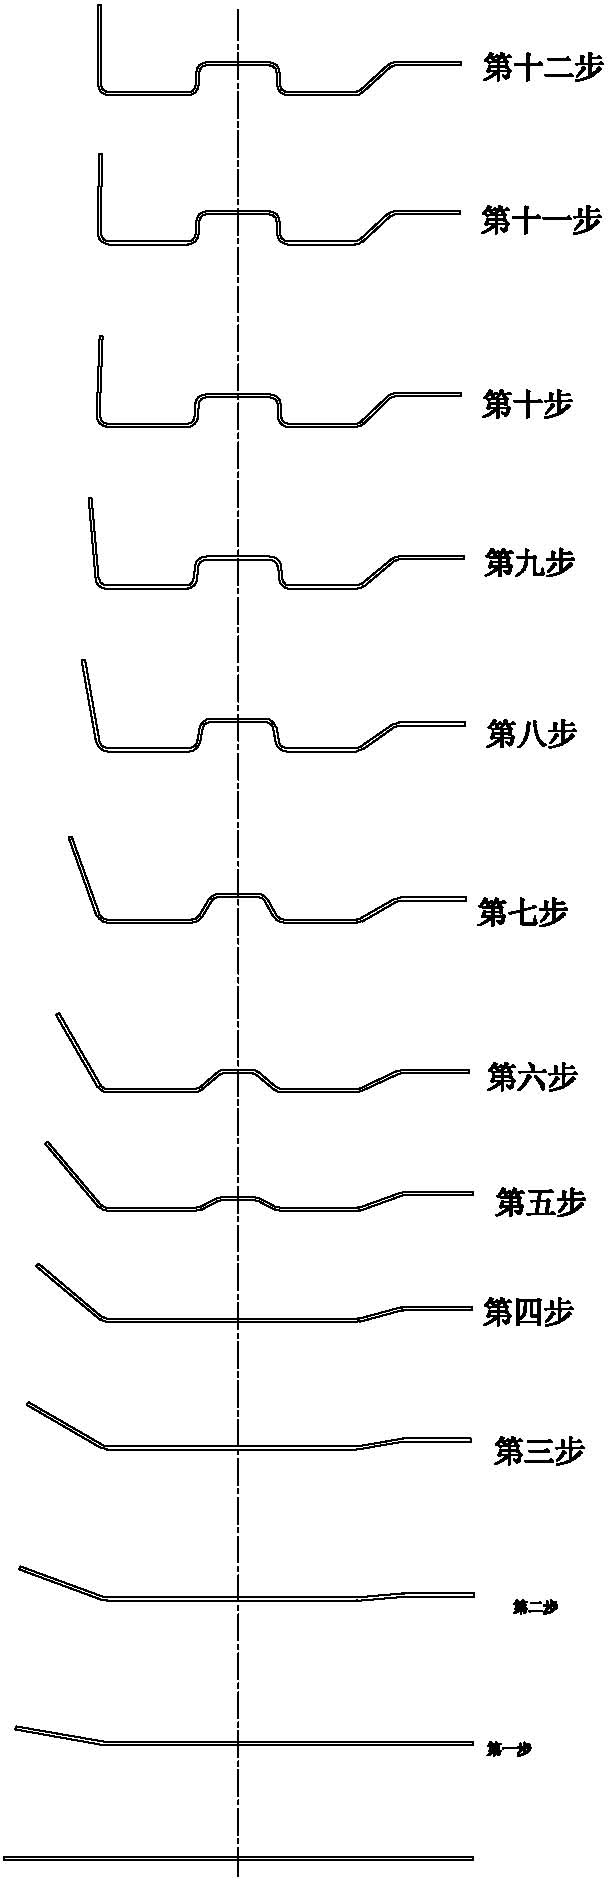 Continuous cold-roll forming method for stainless steel side wall bottom edge beam